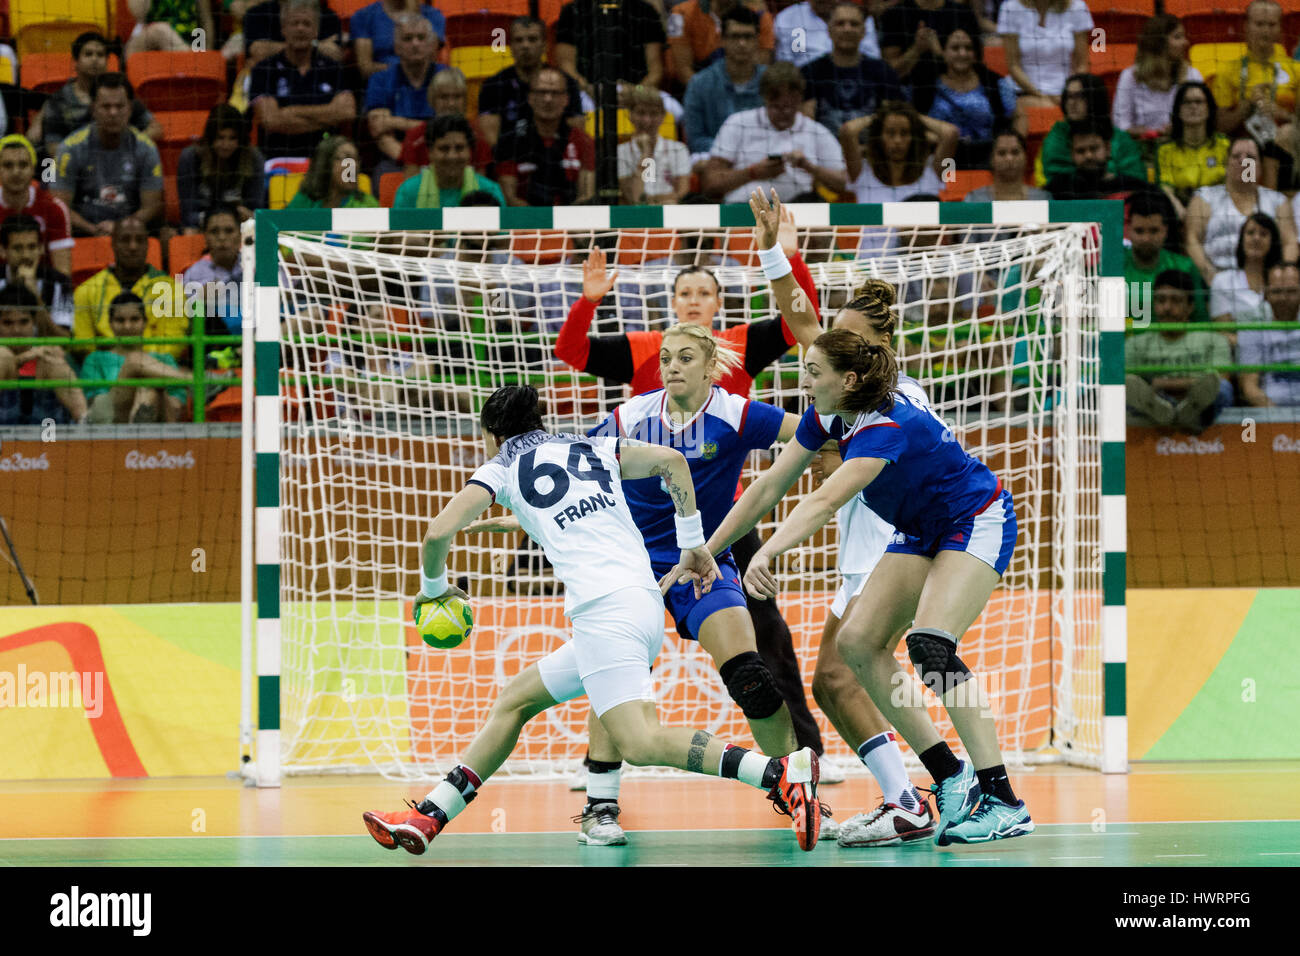 Rio de Janeiro, Brazil. 20 August 2016  Alexandra Lacrabère (FRA) #64 competes in the women's handball gold medal match Russia vs. France at the 2016  Stock Photo